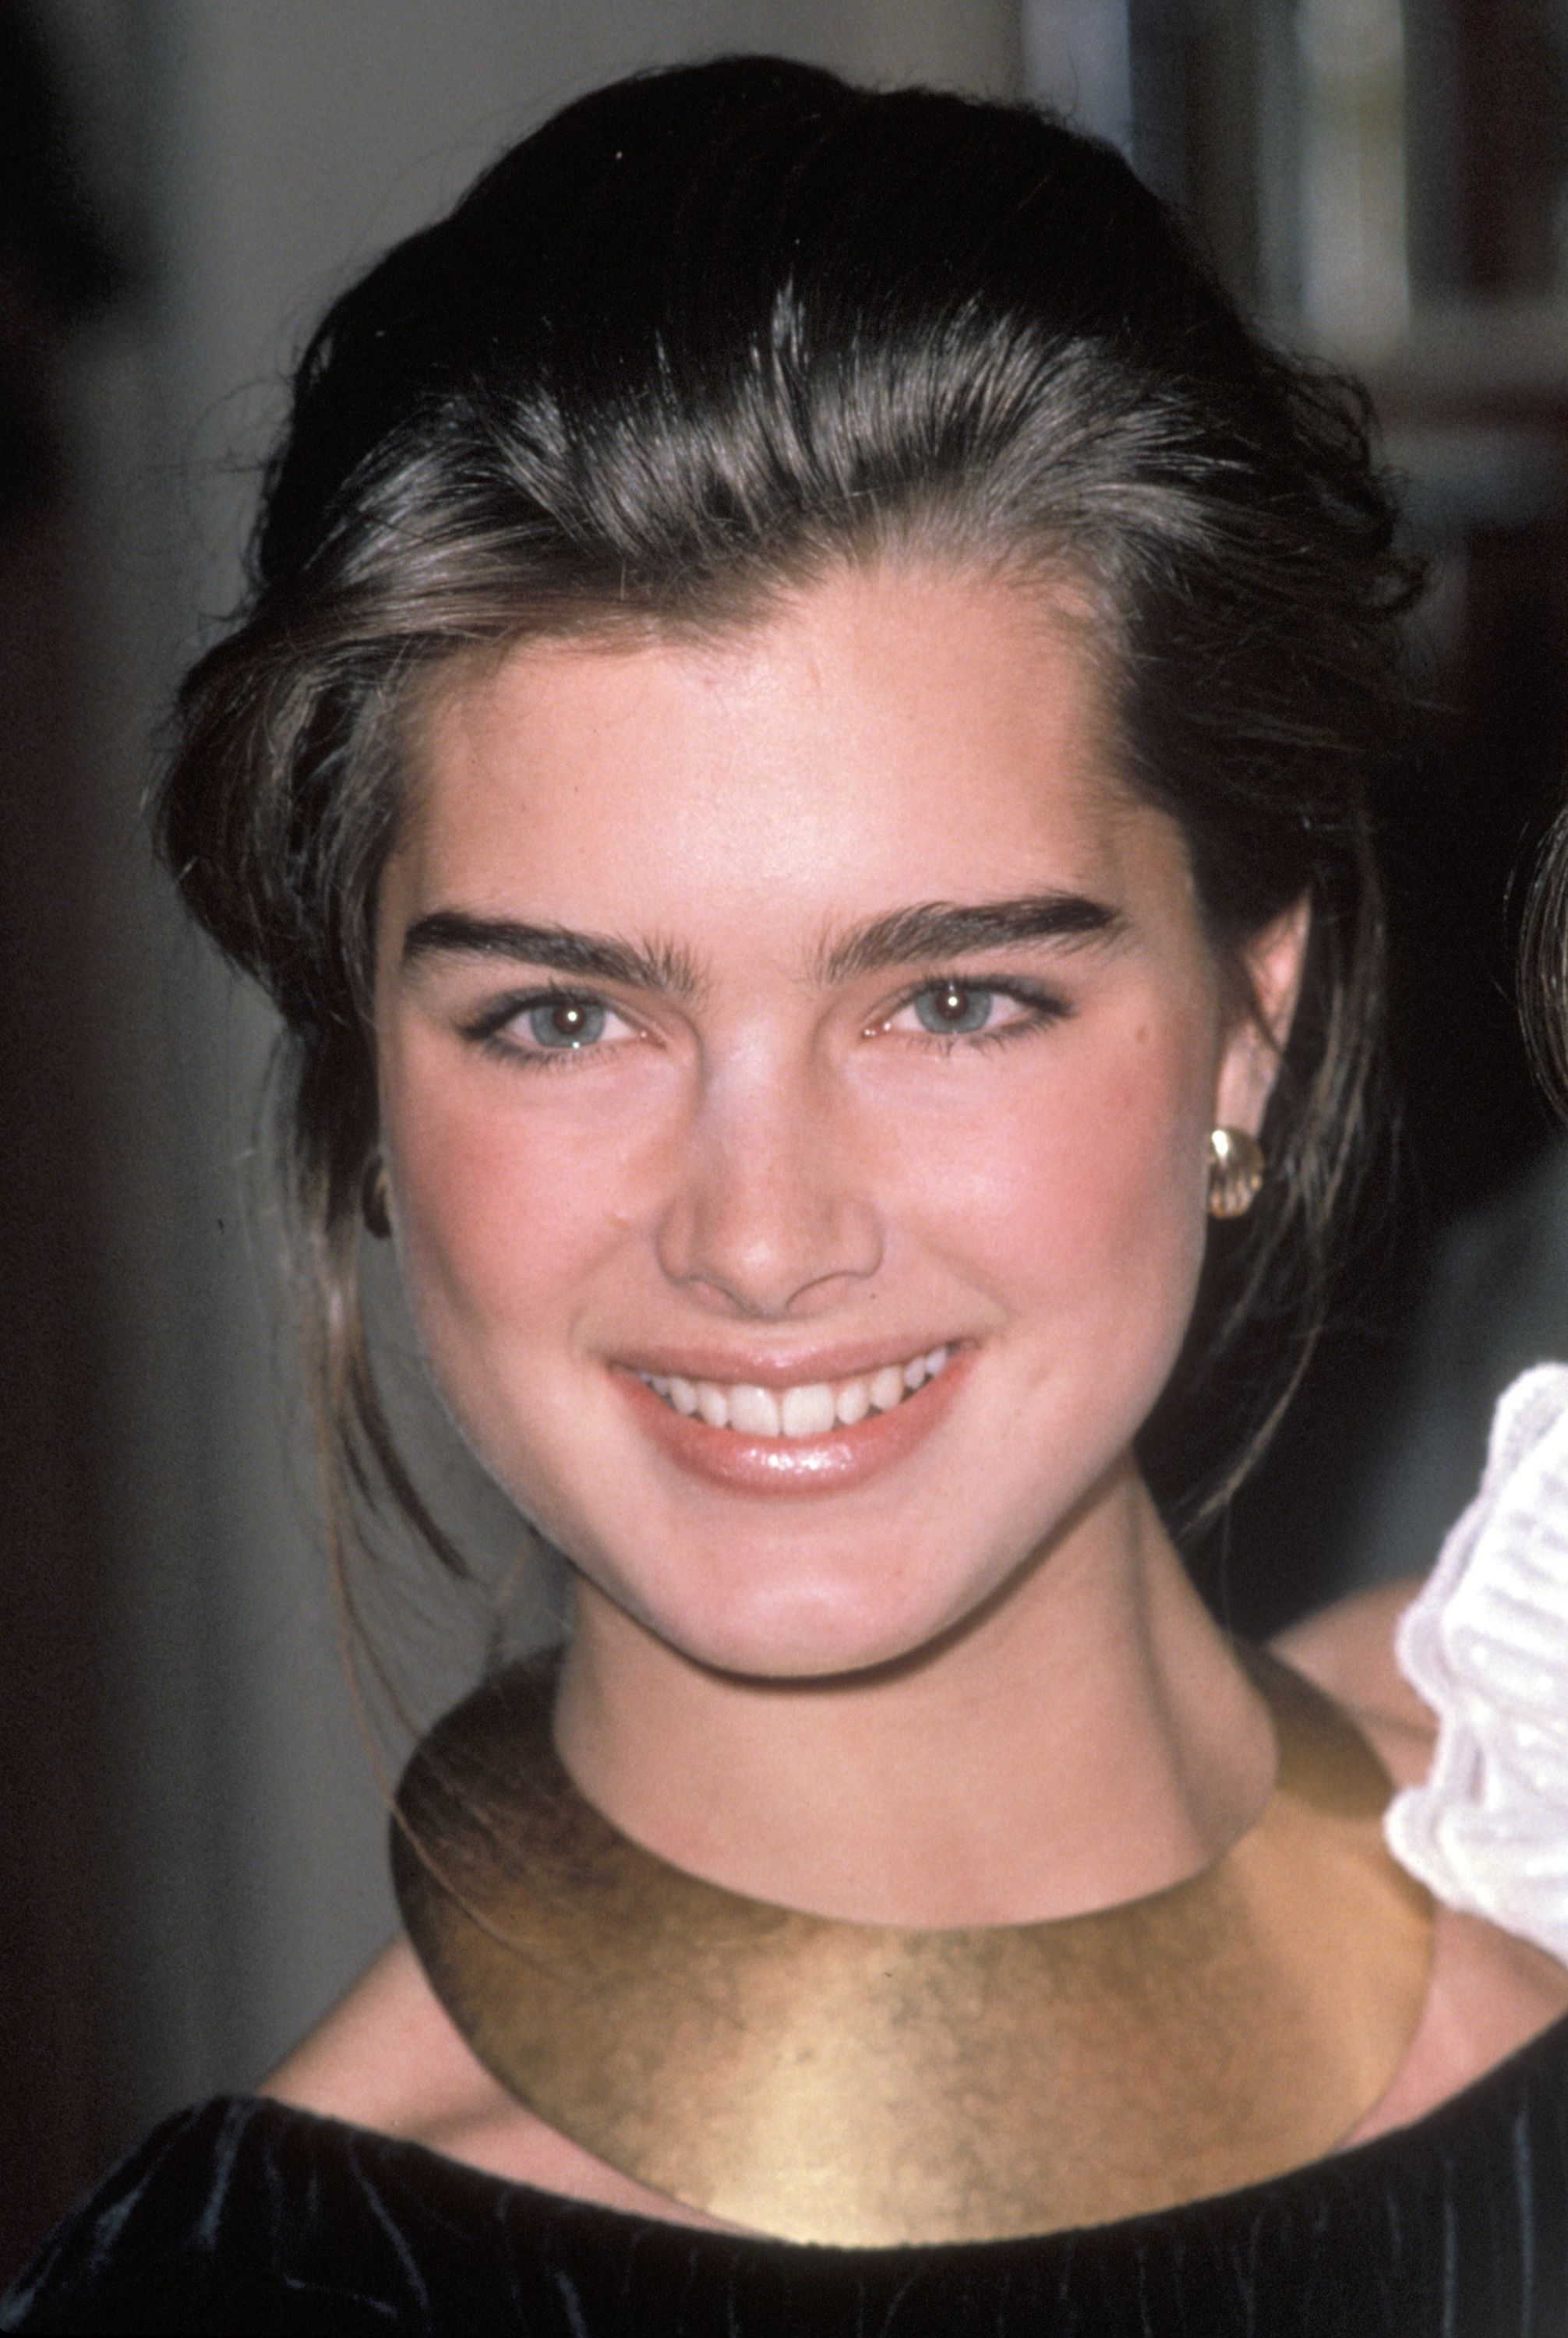 What is the controversy surrounding the naked photos of Brooke Shields in a tub?